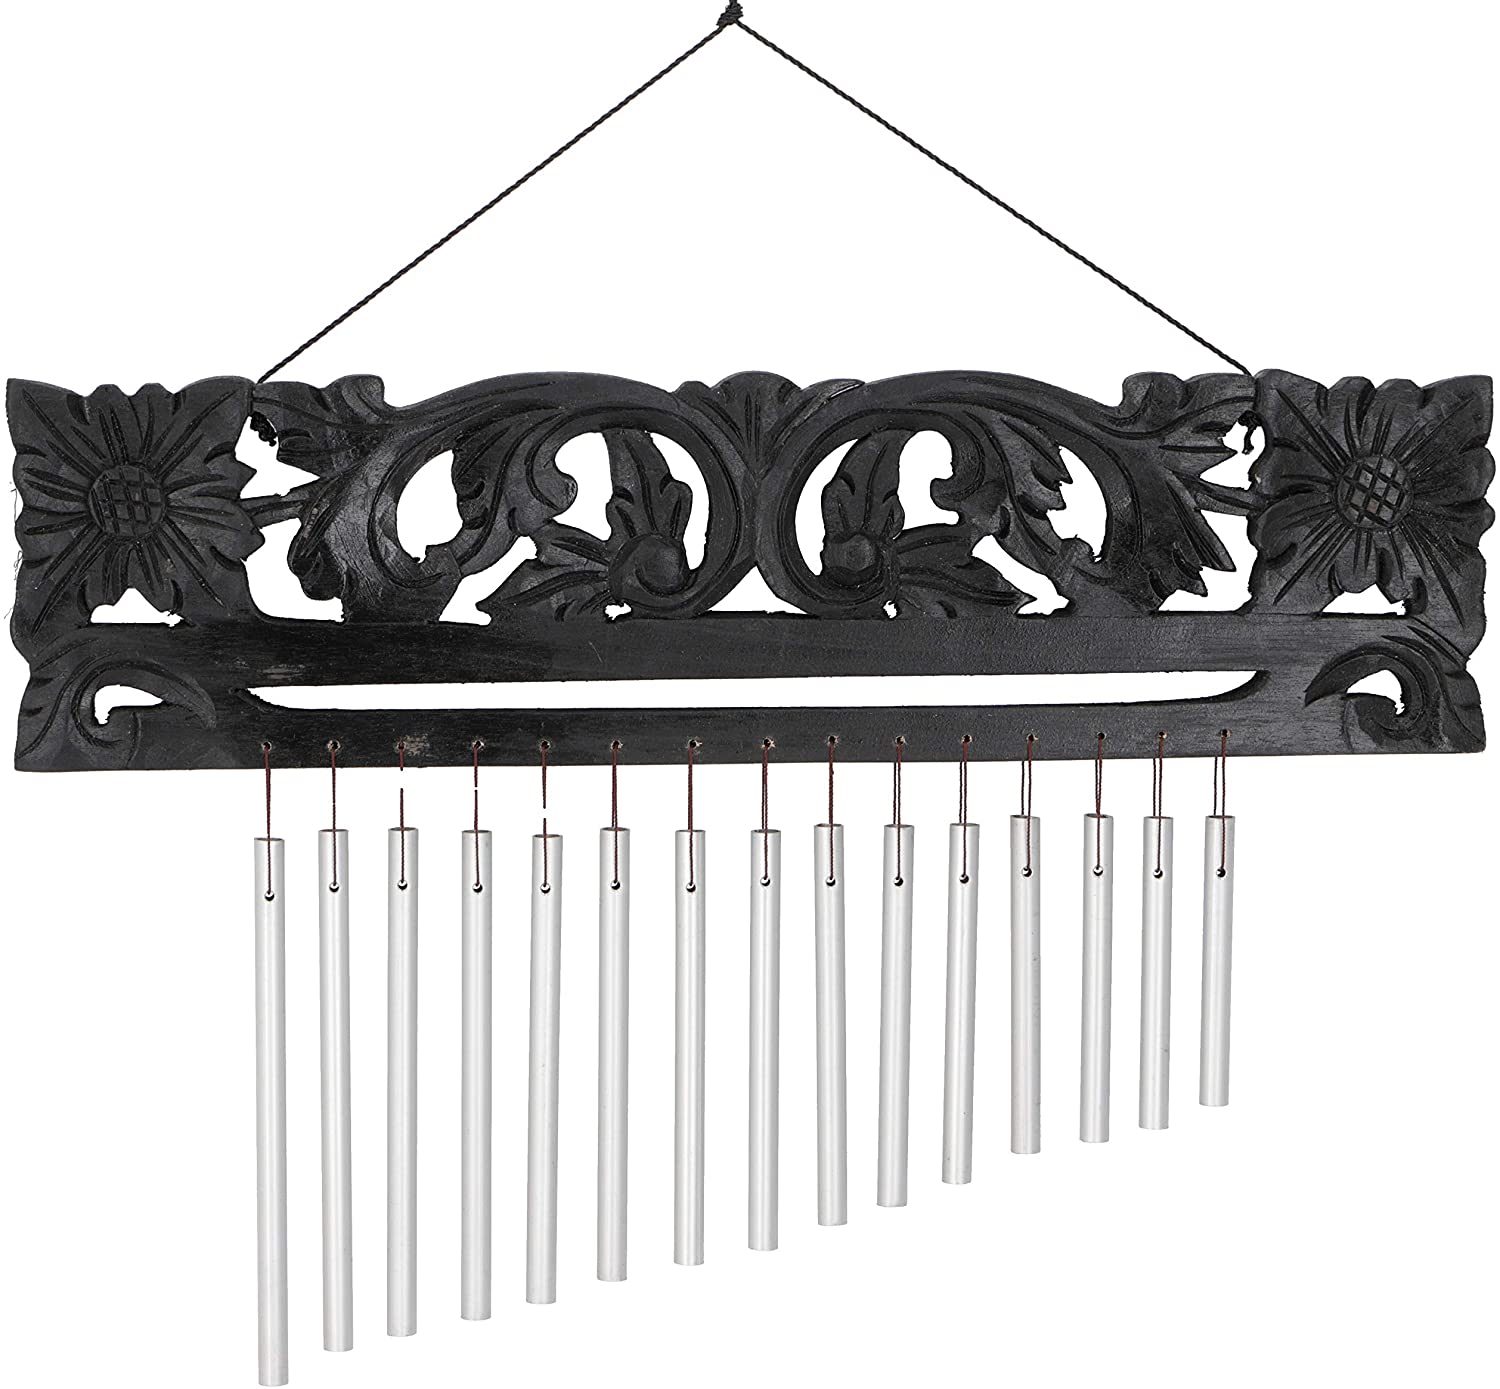 /Etched Aluminum Chimes Windchimes Portable